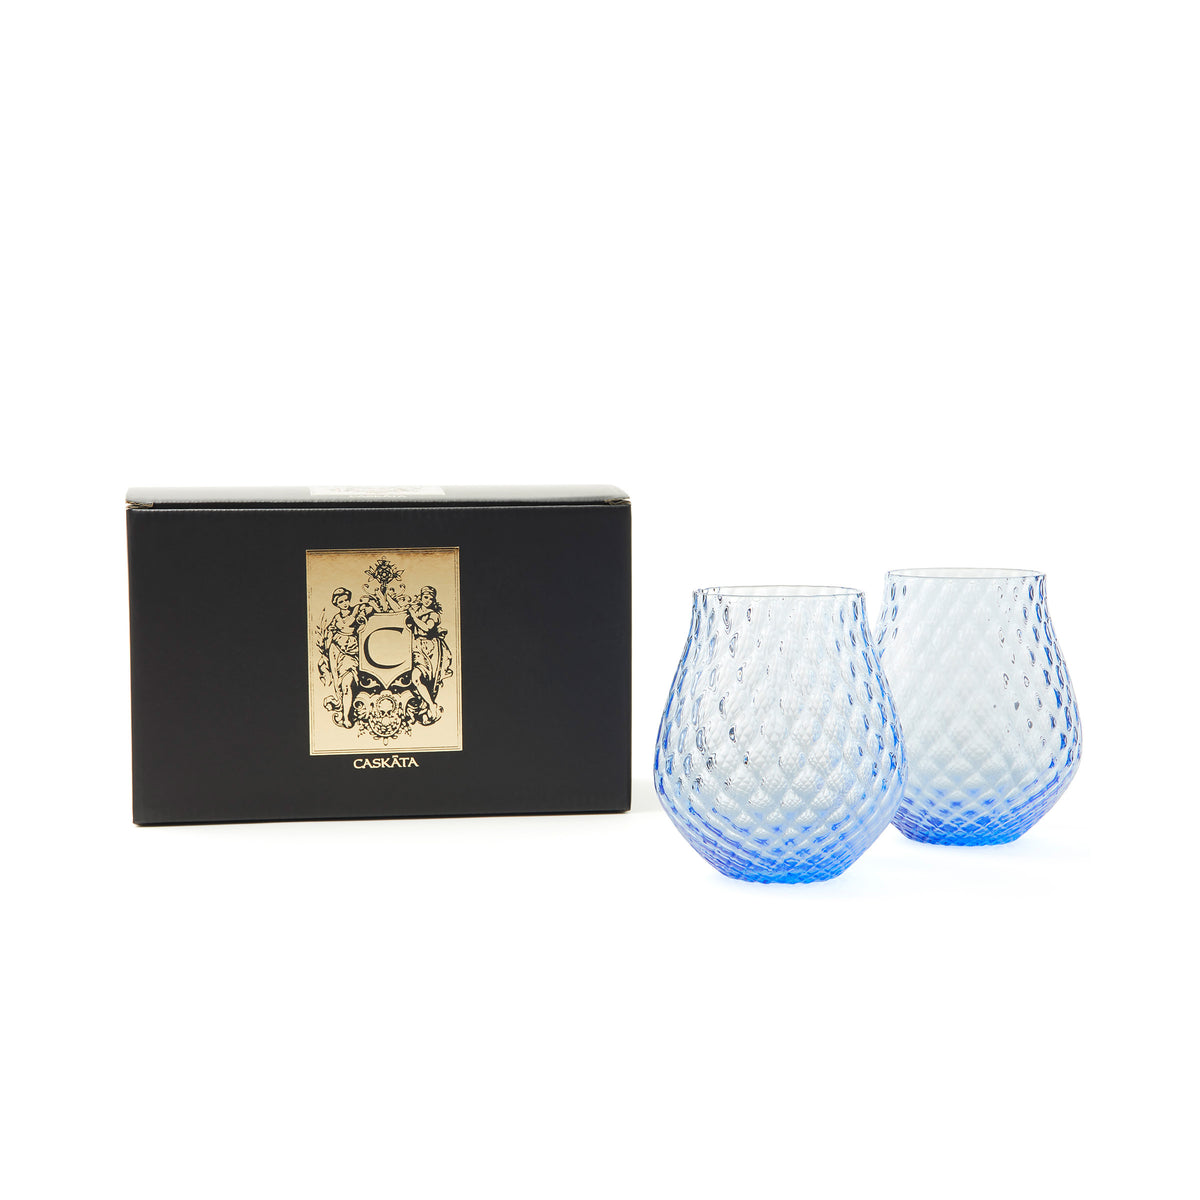 Phoebe cobalt blue mouth-blown optic crystal tumblers from Caskata.